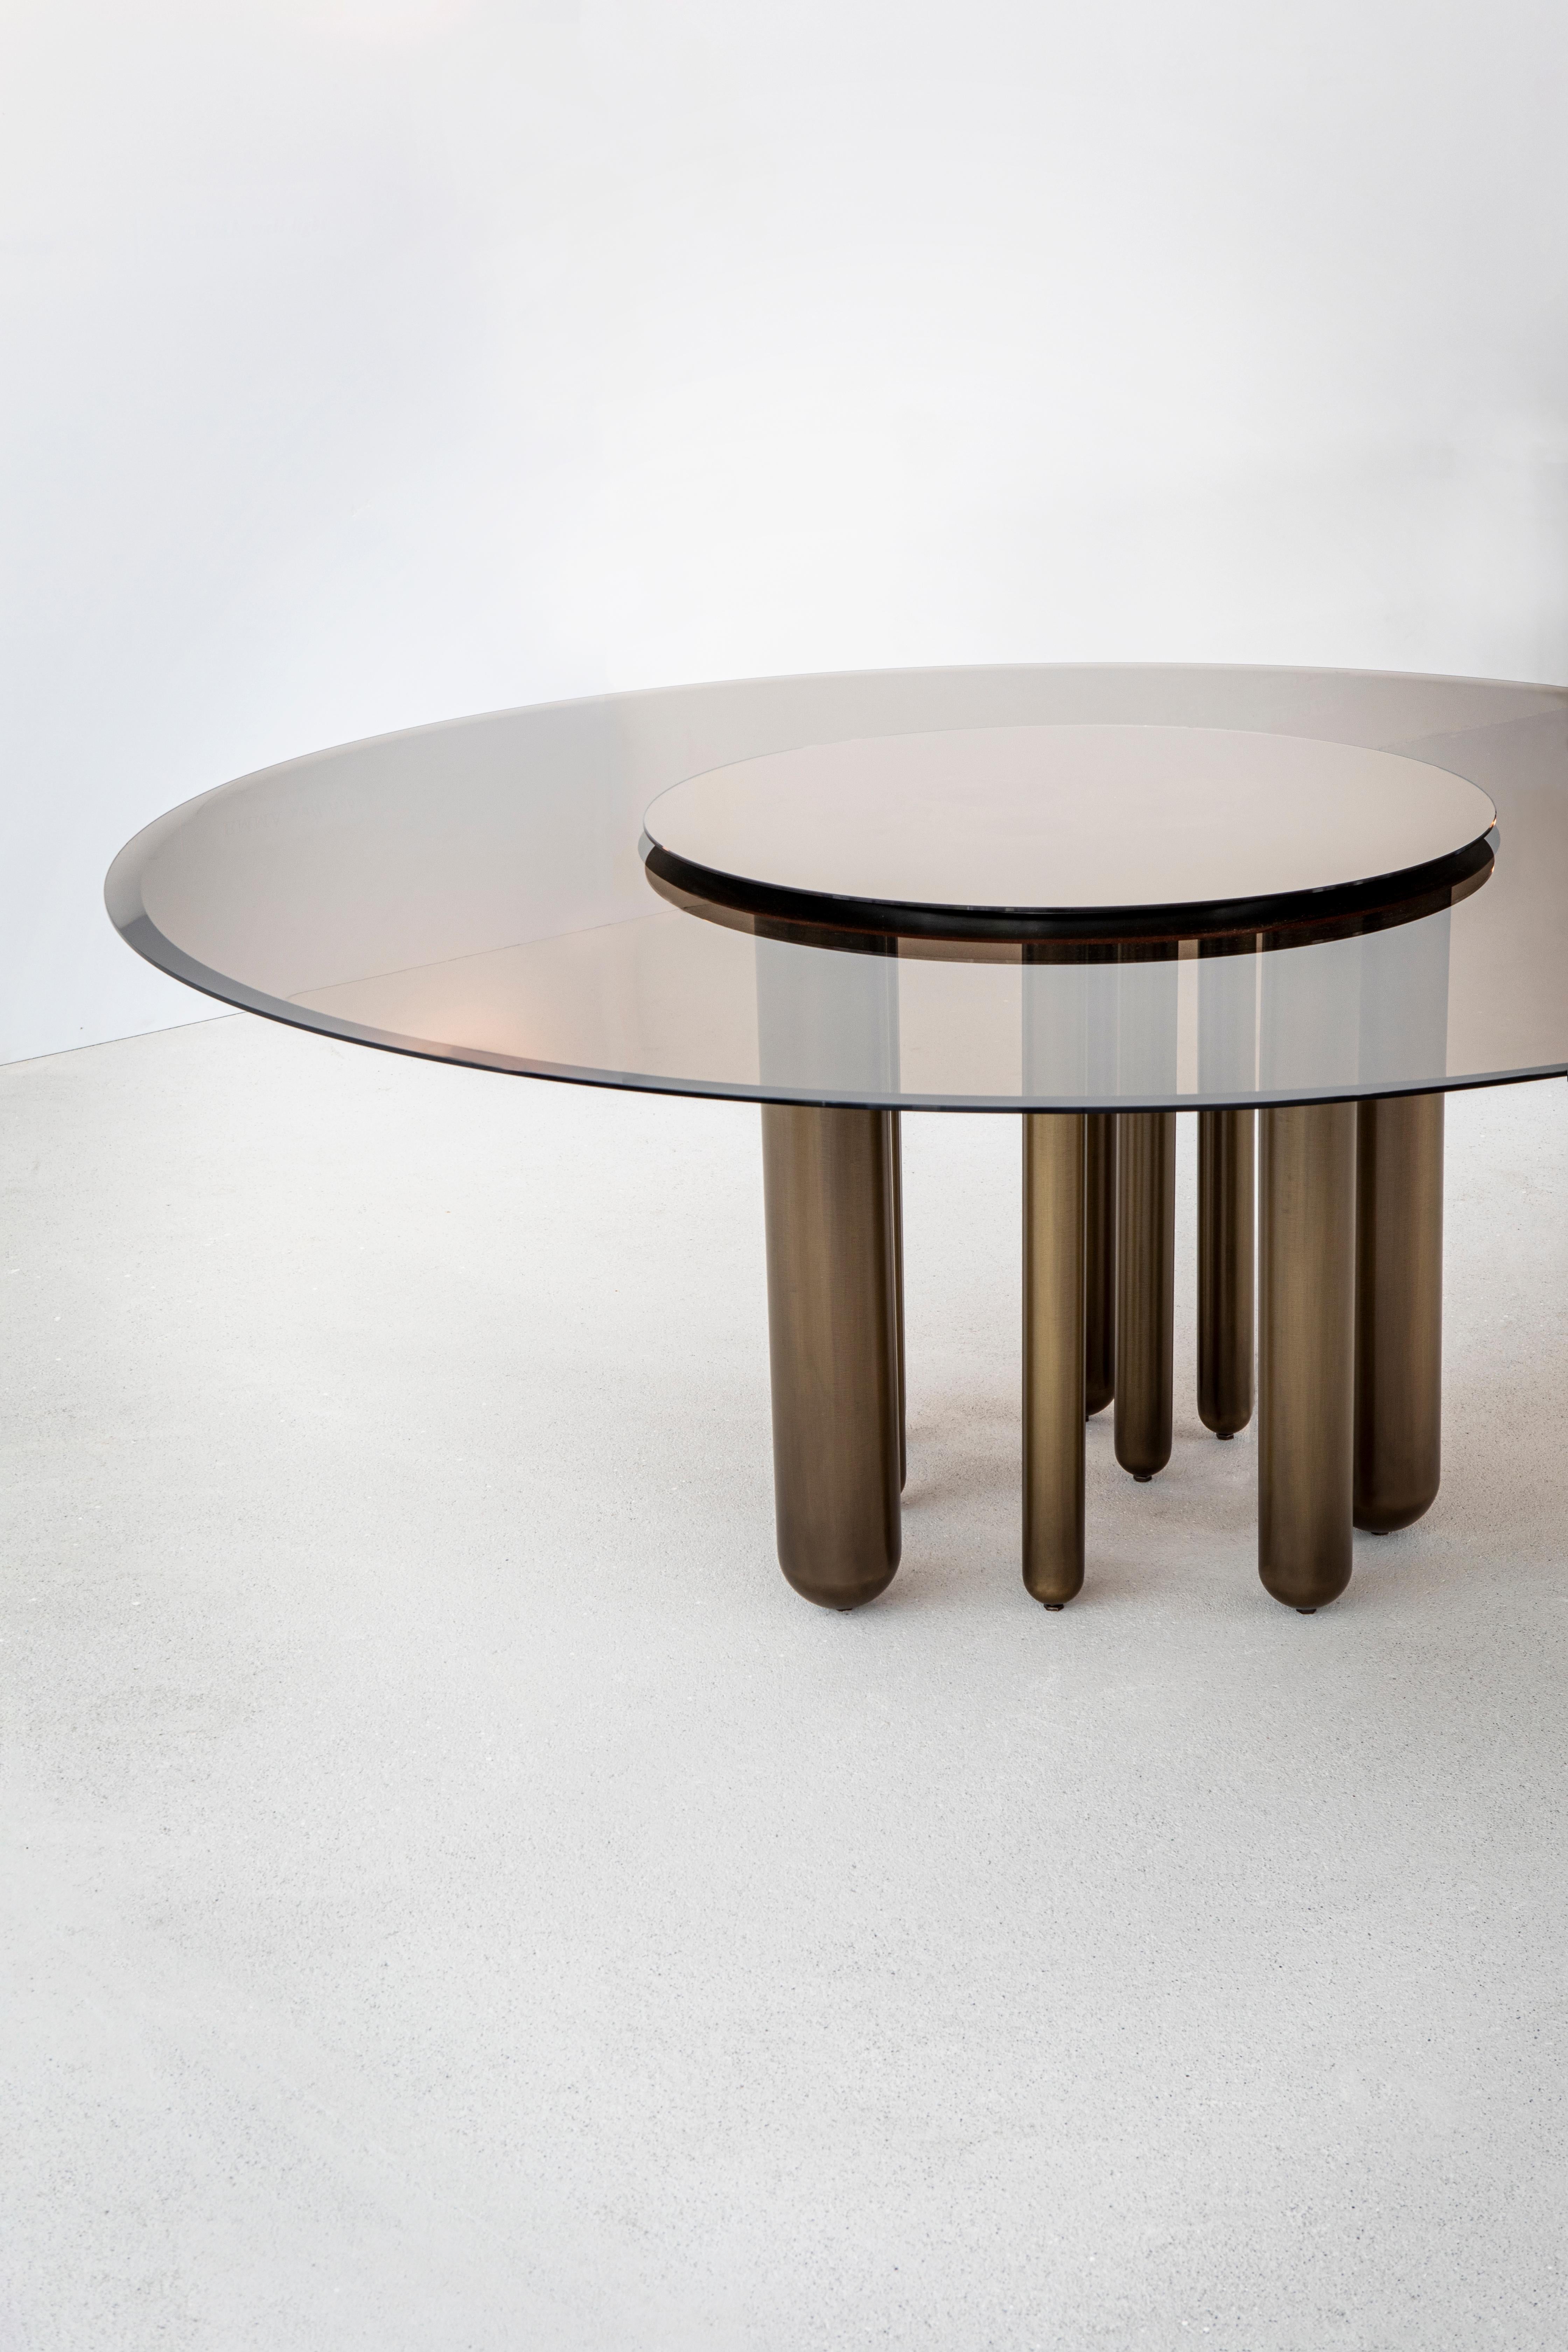 A transparent bronze glass top and mirrored Lazy Susan are supported on a base of irregularly spaced brass legs of different sizes. A chord. A beat. A rhythm. A glimmering bronze finish and sparkling mirror, always shining, always spinning, this